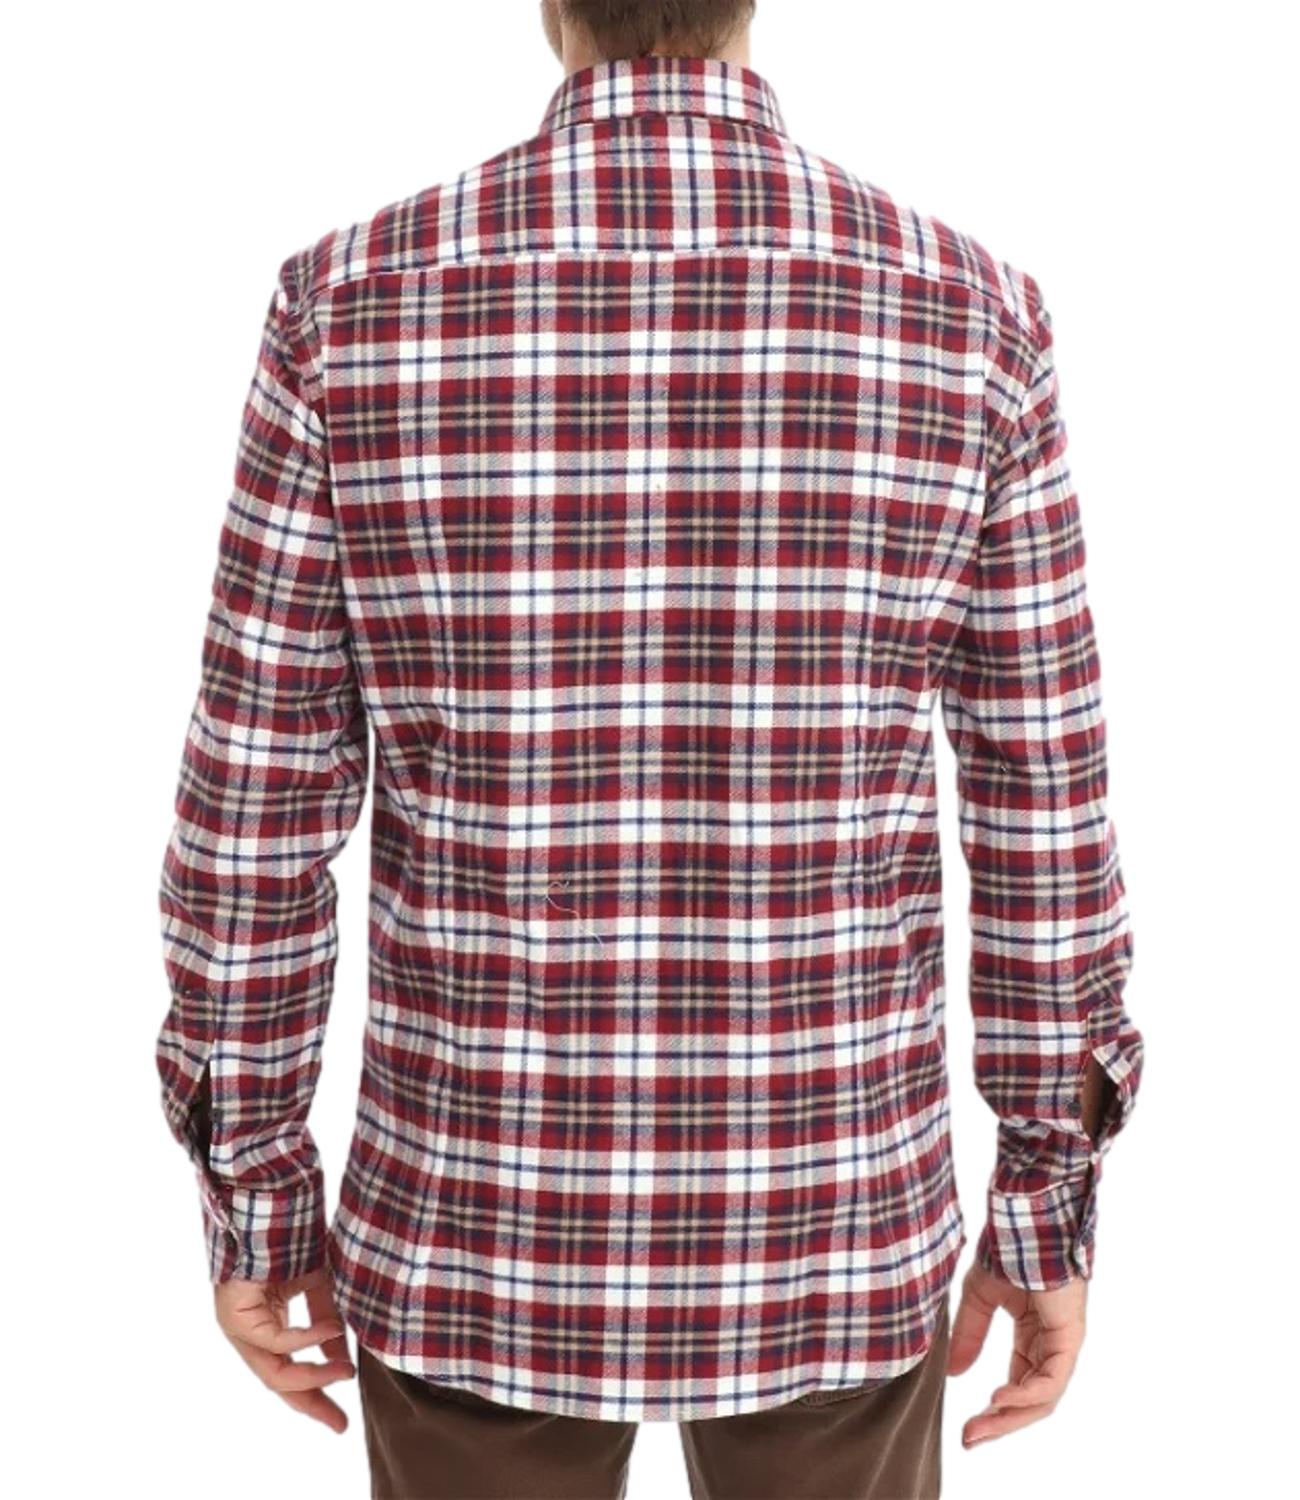 Men's flannel shirt with red and white checks